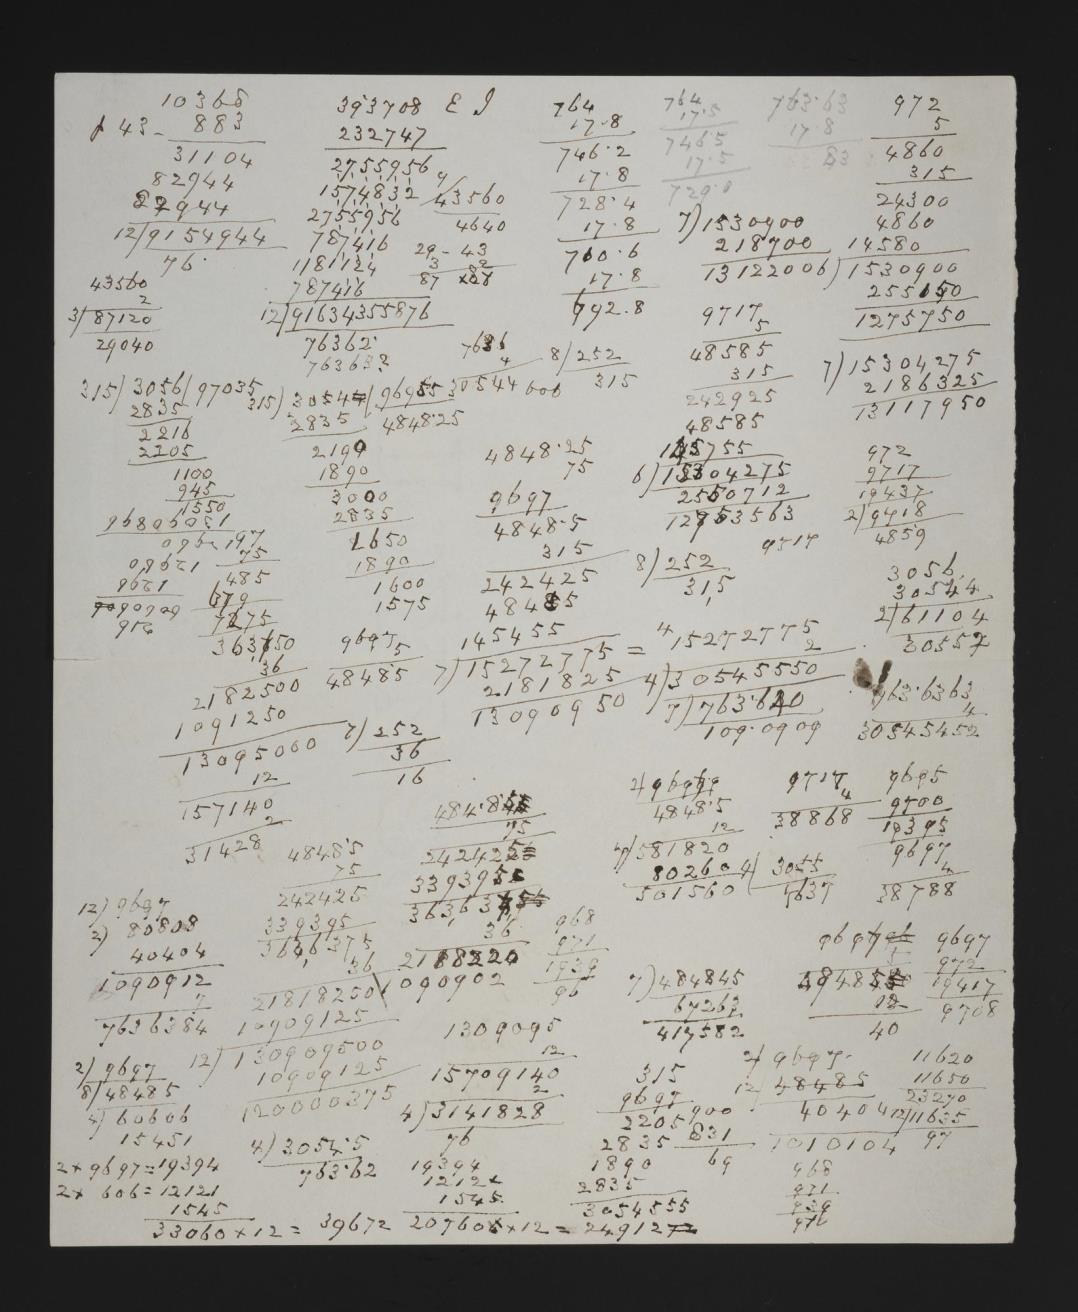 Paper with handwritten mathematical calculations and notations in the handwriting of Charles Piazzi Smyth, found with a manuscript of John Taylor's 'The Mystery of the Pyramids Explained', a work which influenced him. © Royal Observatory Edinburgh CPS Archives.